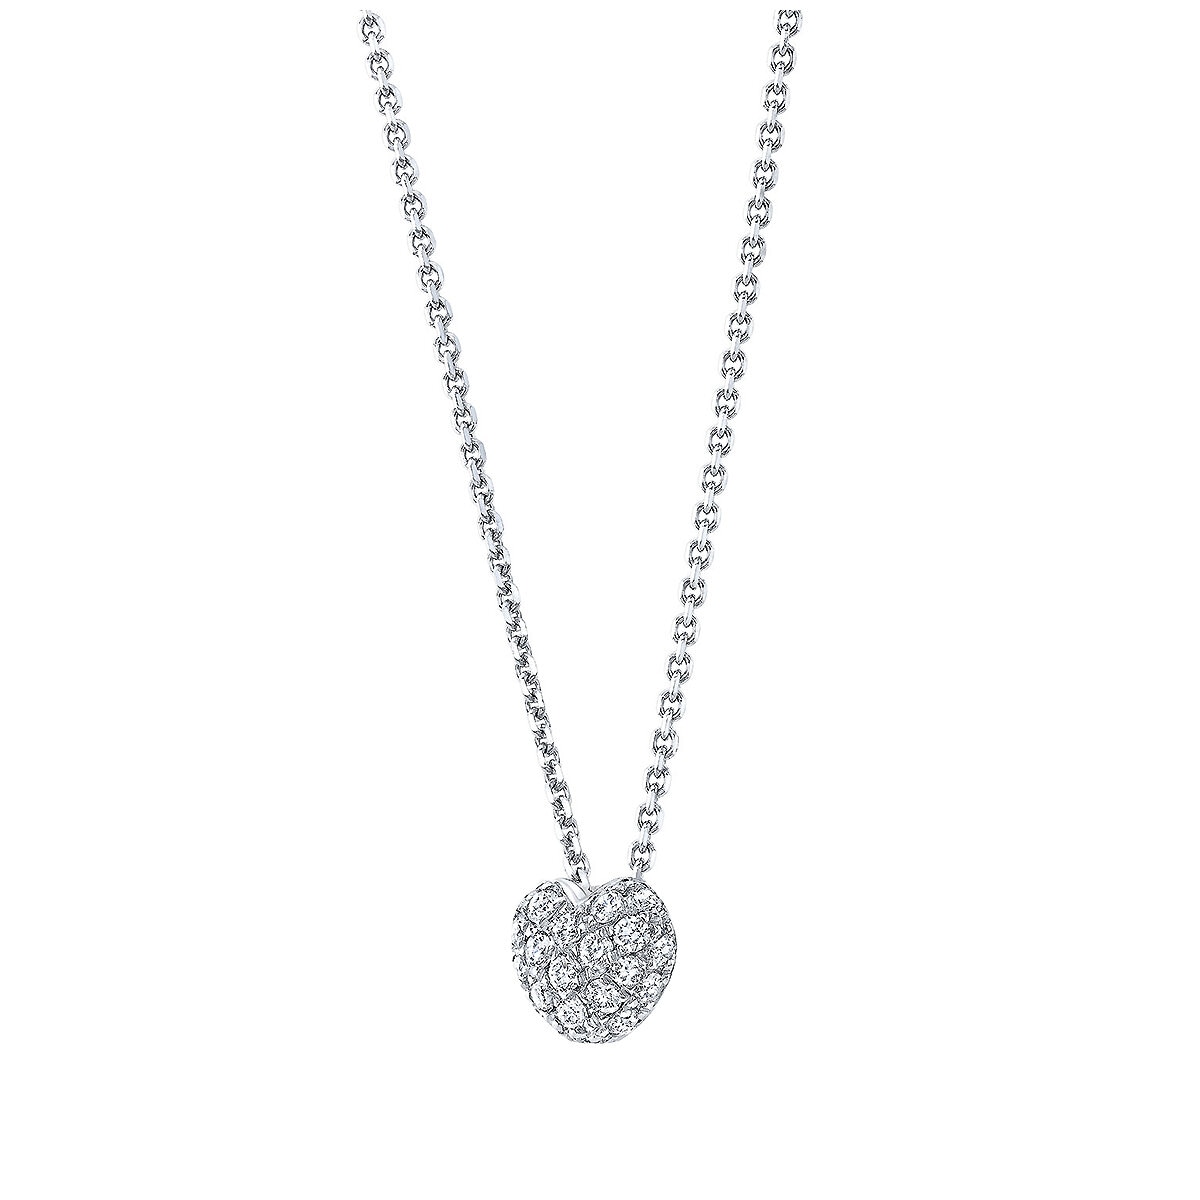 18KT White Gold 0.23CTW Round Diamond Pave Heart Necklace/